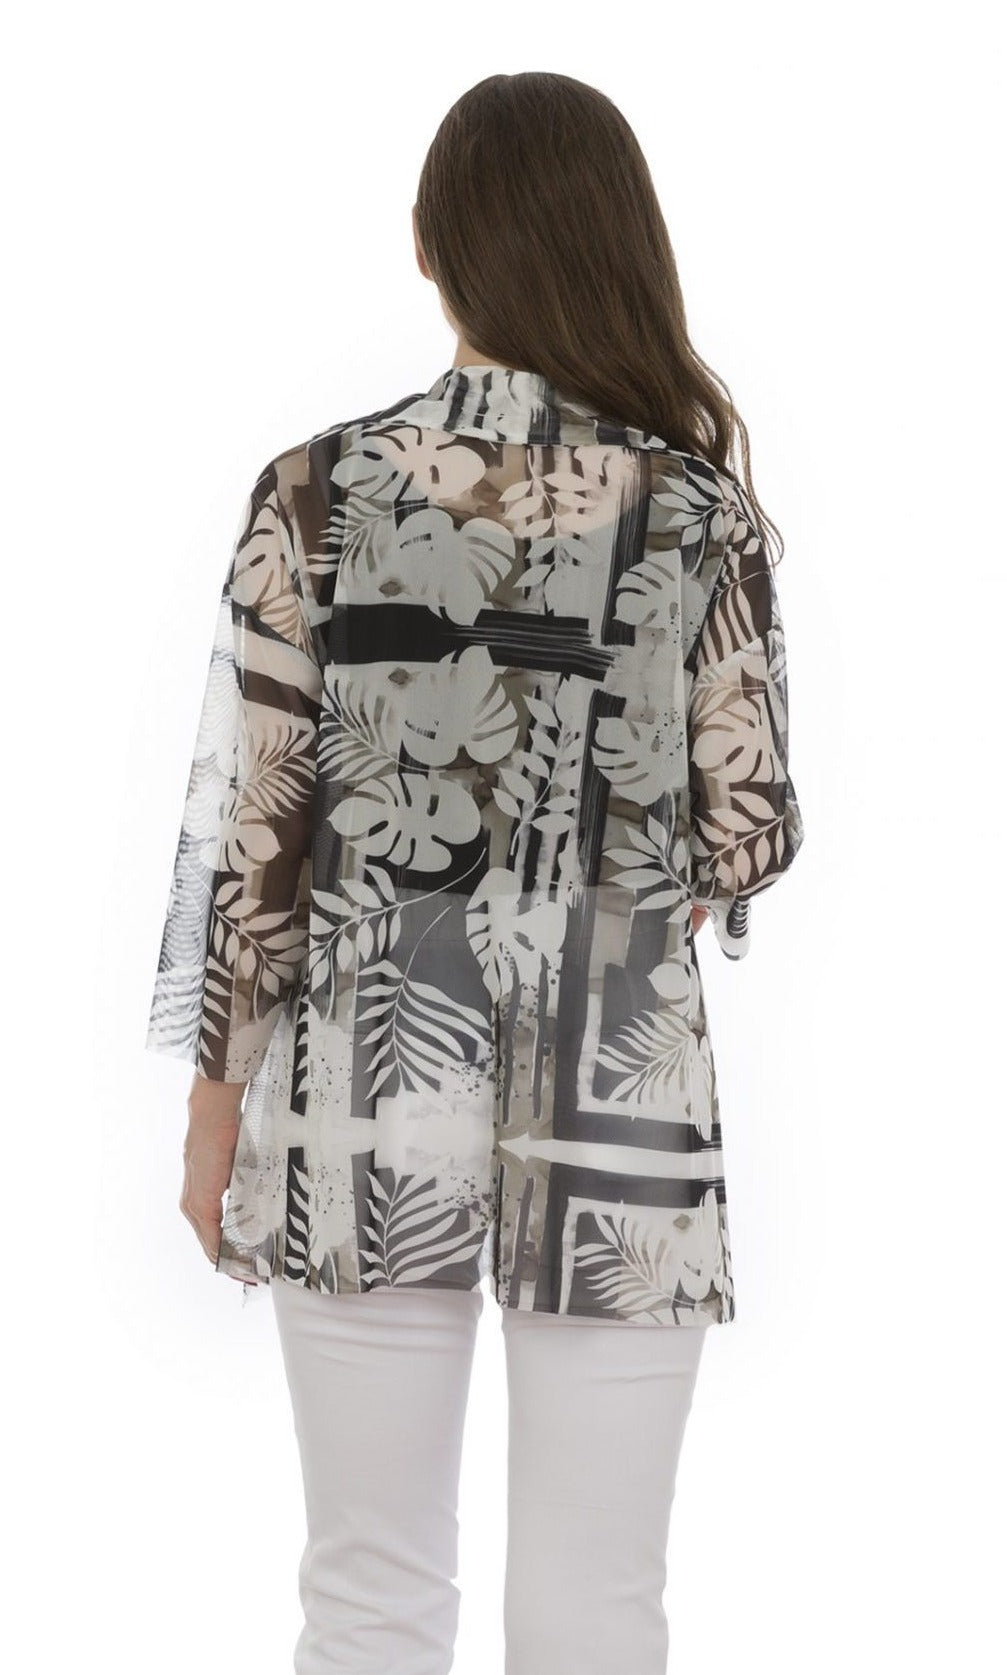 Back top half view of a woman wearing white capris and the luukaa leaf print top. This top is sheer with white and grey leaf print. The sleeves are 3/4 length and the hem is long in the back.